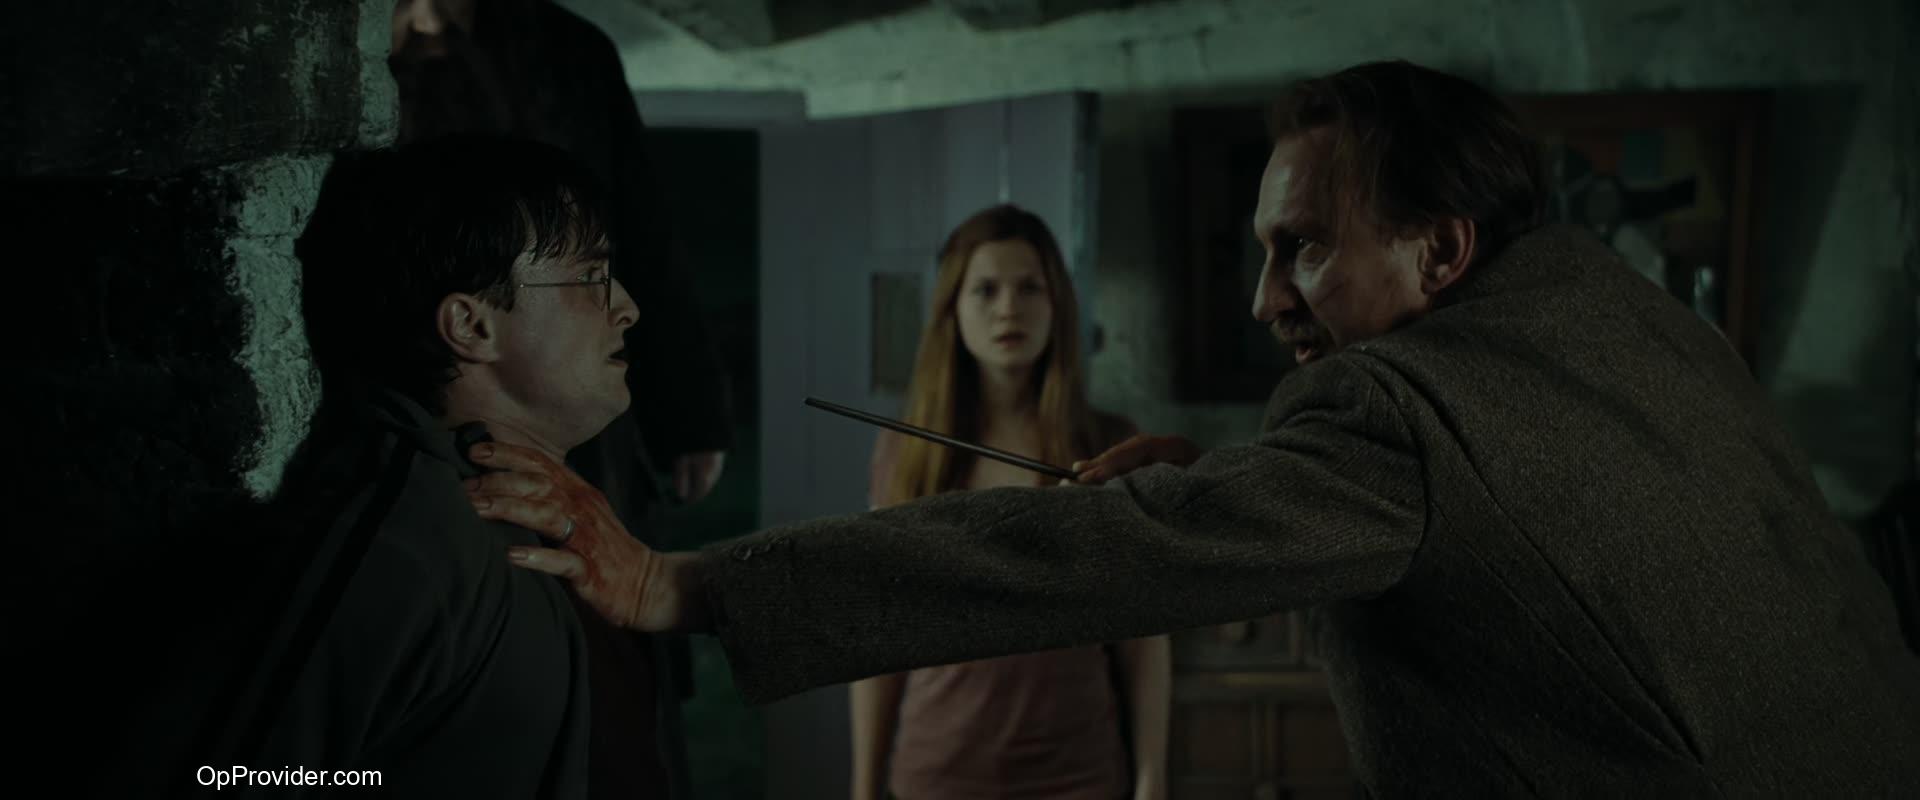 Download Harry Potter The Deathly Hallows - Part 1 (2010) Full movie in 480p 720p 1080p